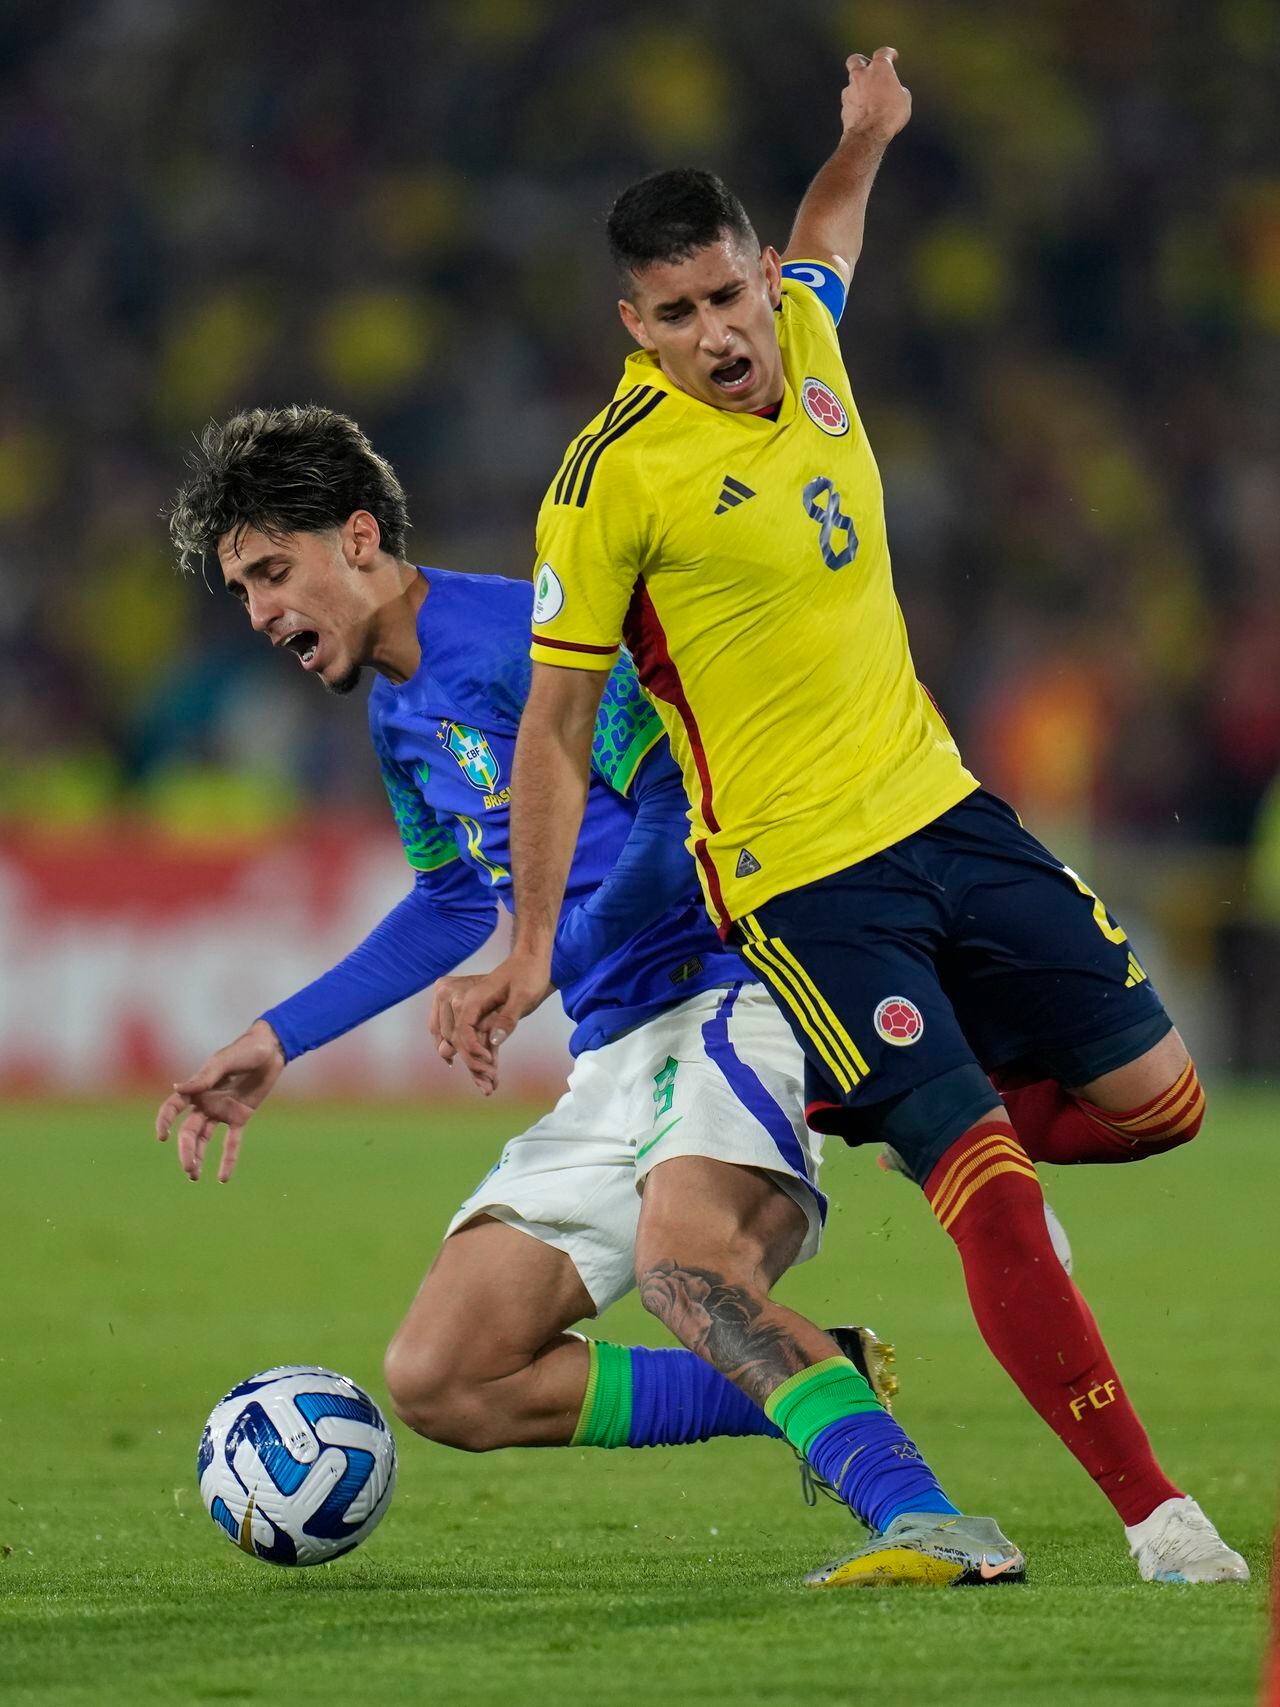 Brazil's Marlon Gomes, left, and Colombia's Gustavo Puerta struggle for the ball during a South America U-20 Championship soccer match in Bogota, Colombia, Thursday, Feb. 9, 2023. (AP Photo/Fernando Vergara)